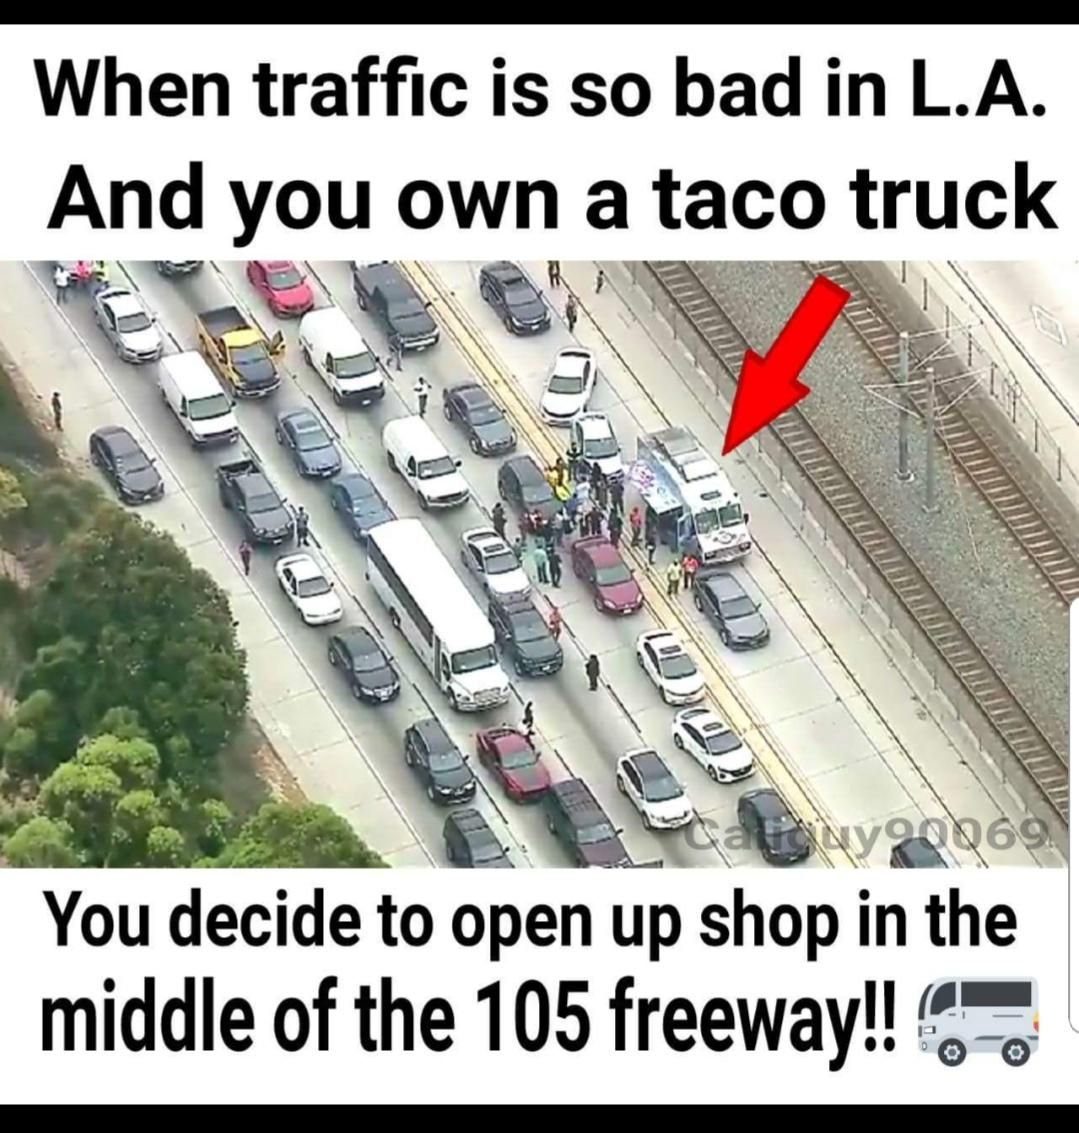 Tanker truck accident in LA had people stuck on the freeway for hours...